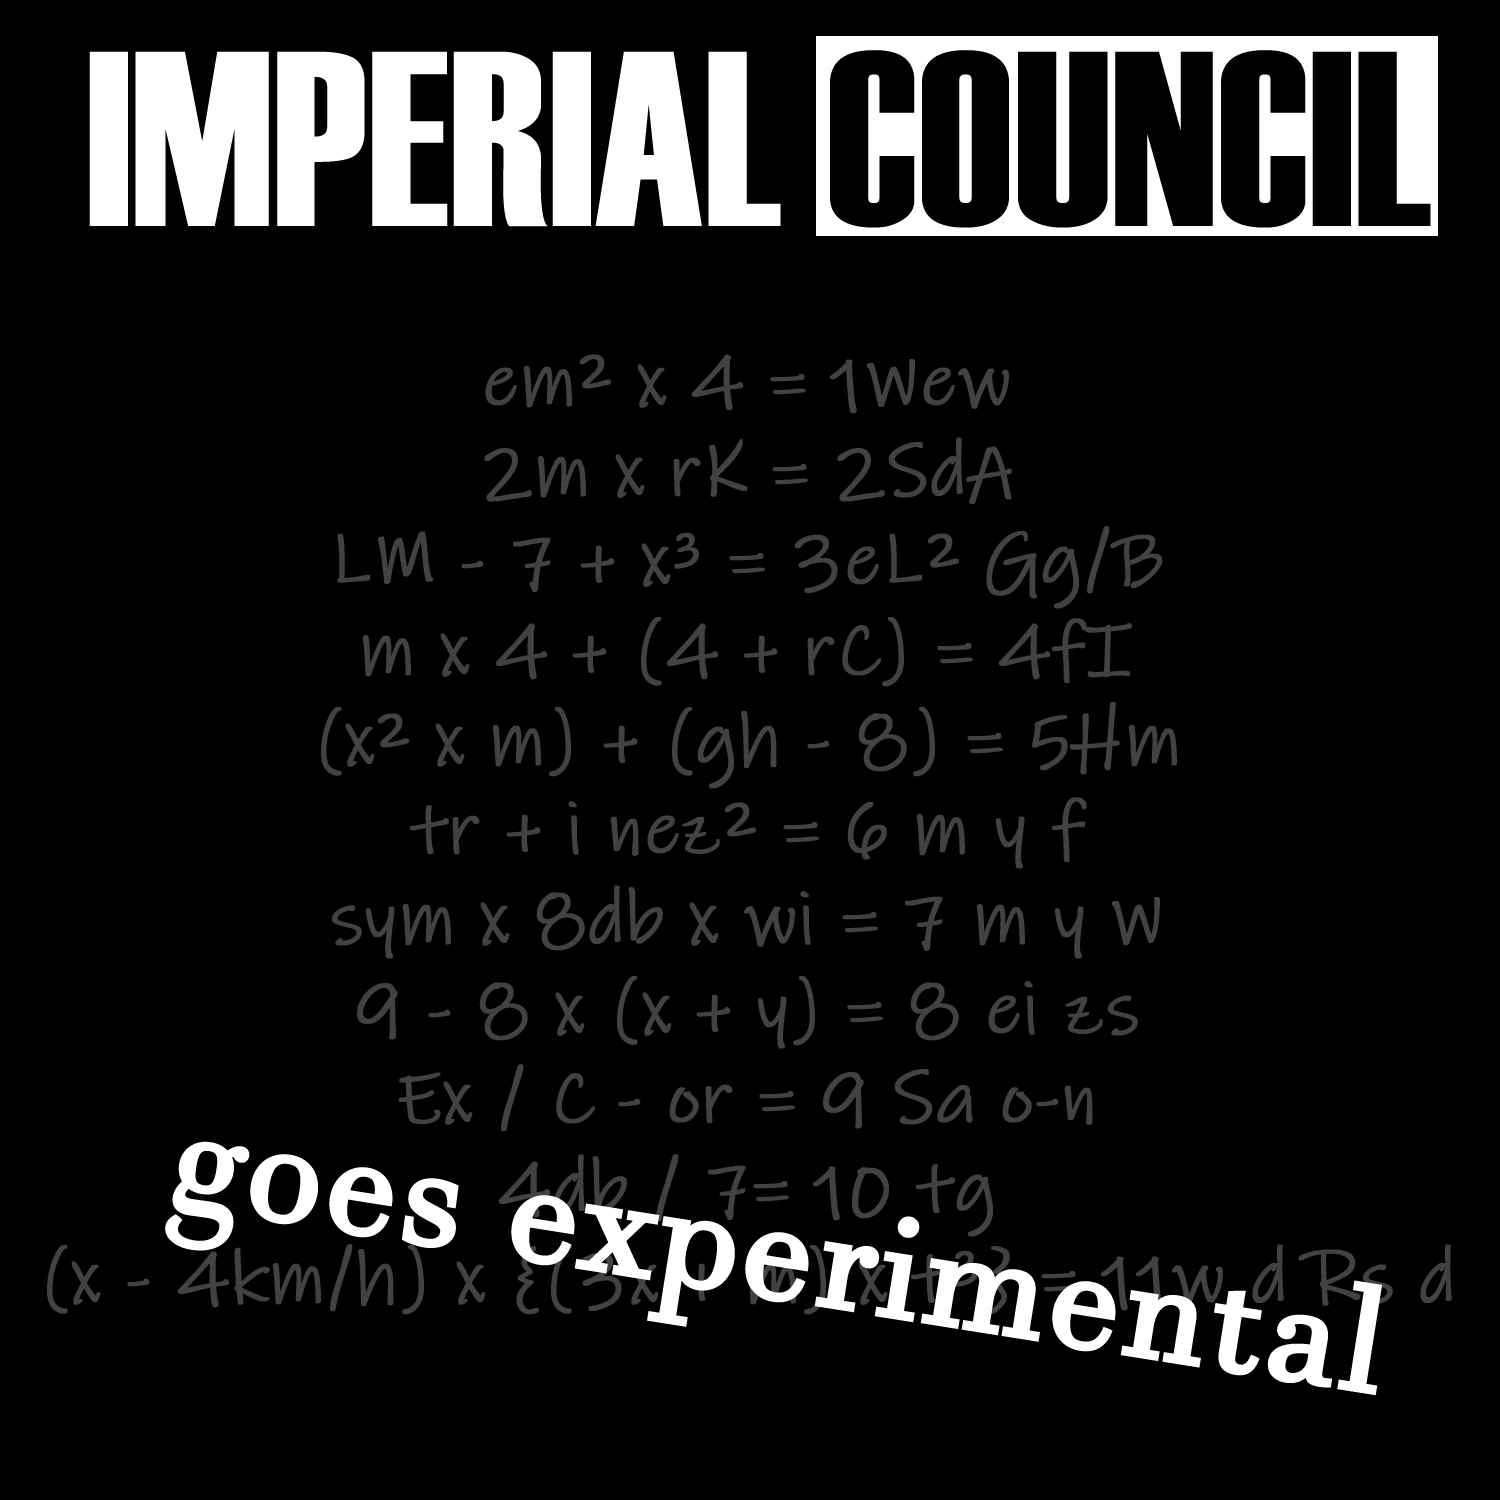 ImperialCouncil goes experimental